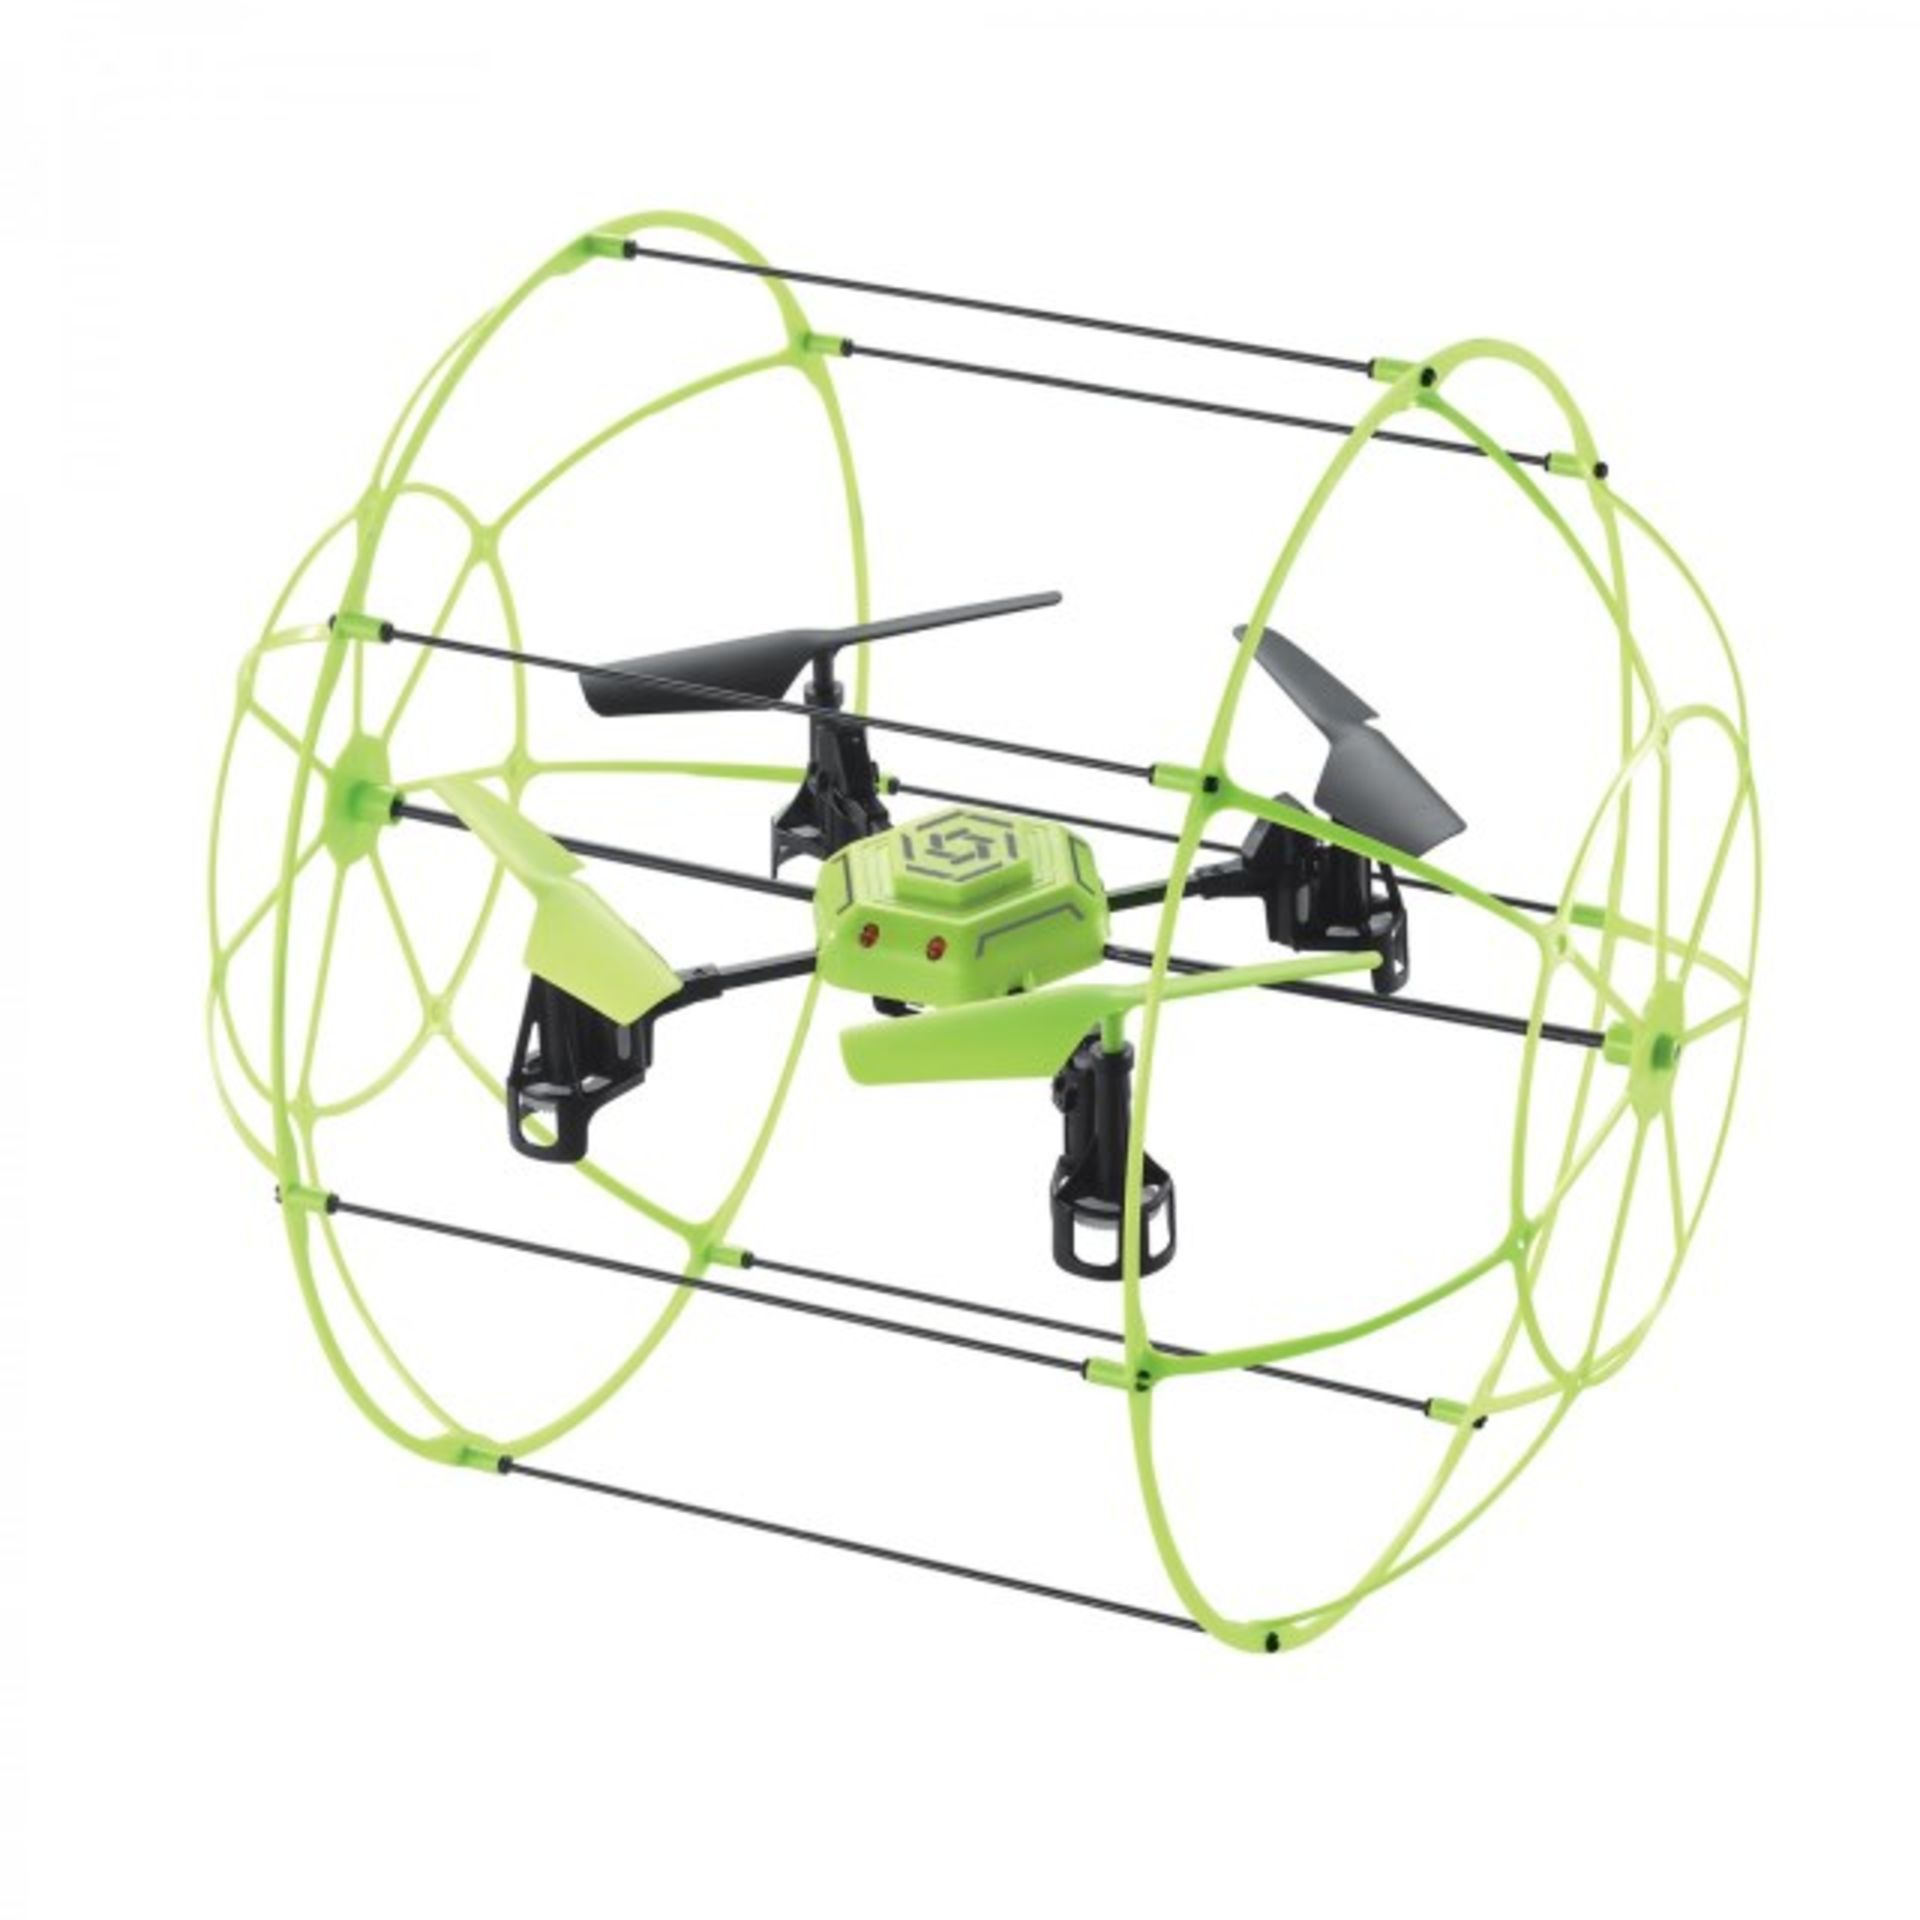 V *TRADE QTY* Brand New Galaxy Destroyer 2.4G Quadcopter Aerocraft - Easy To Fly Technology - Impact